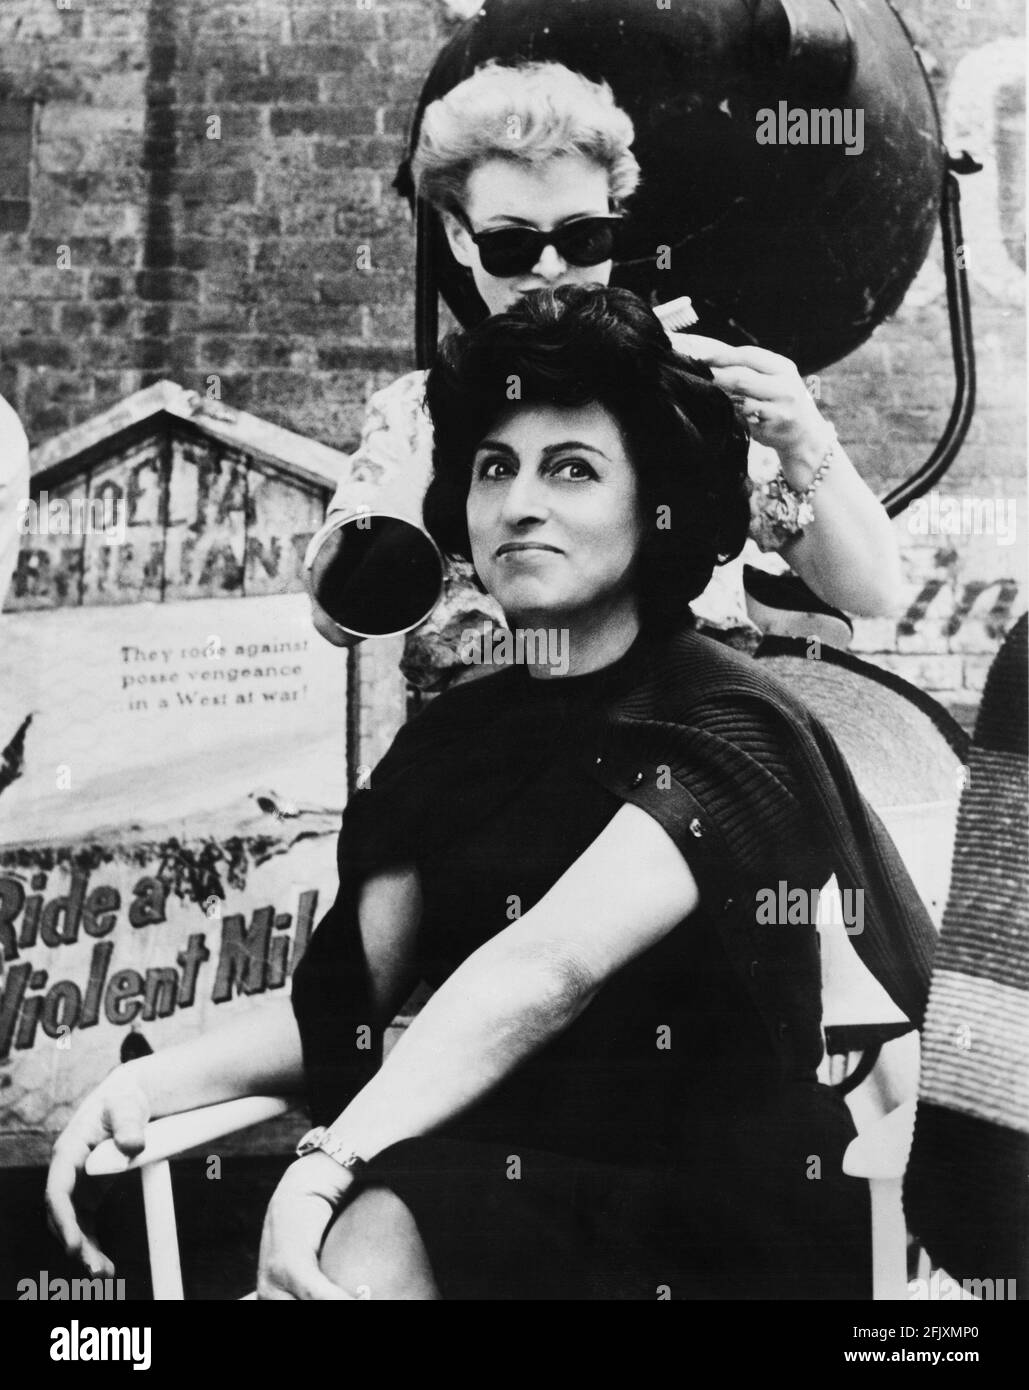 1959 : The italian movie actress ANNA  MAGNANI smiled for the camera on the set of  THE FUGITIVE KIND ( Pelle di serpente )  by Sidney Lumet , from a play by Tennessee Williams , United Artist Productions . Photo taken by actor Paul Newman . While her co-star JOANNE WOODWARD aid like hairdo repair the Magnani  after one of her tempestuos scenes. PAUL NEWMAN , husband of star JOANNE WOODWARD , visited the set and acted as part-time still photographer for the production.- CINEMA - FILM - attrice  - attore - parrucchiera - smile - sorriso - sul set  ----   Archivio GBB Stock Photo